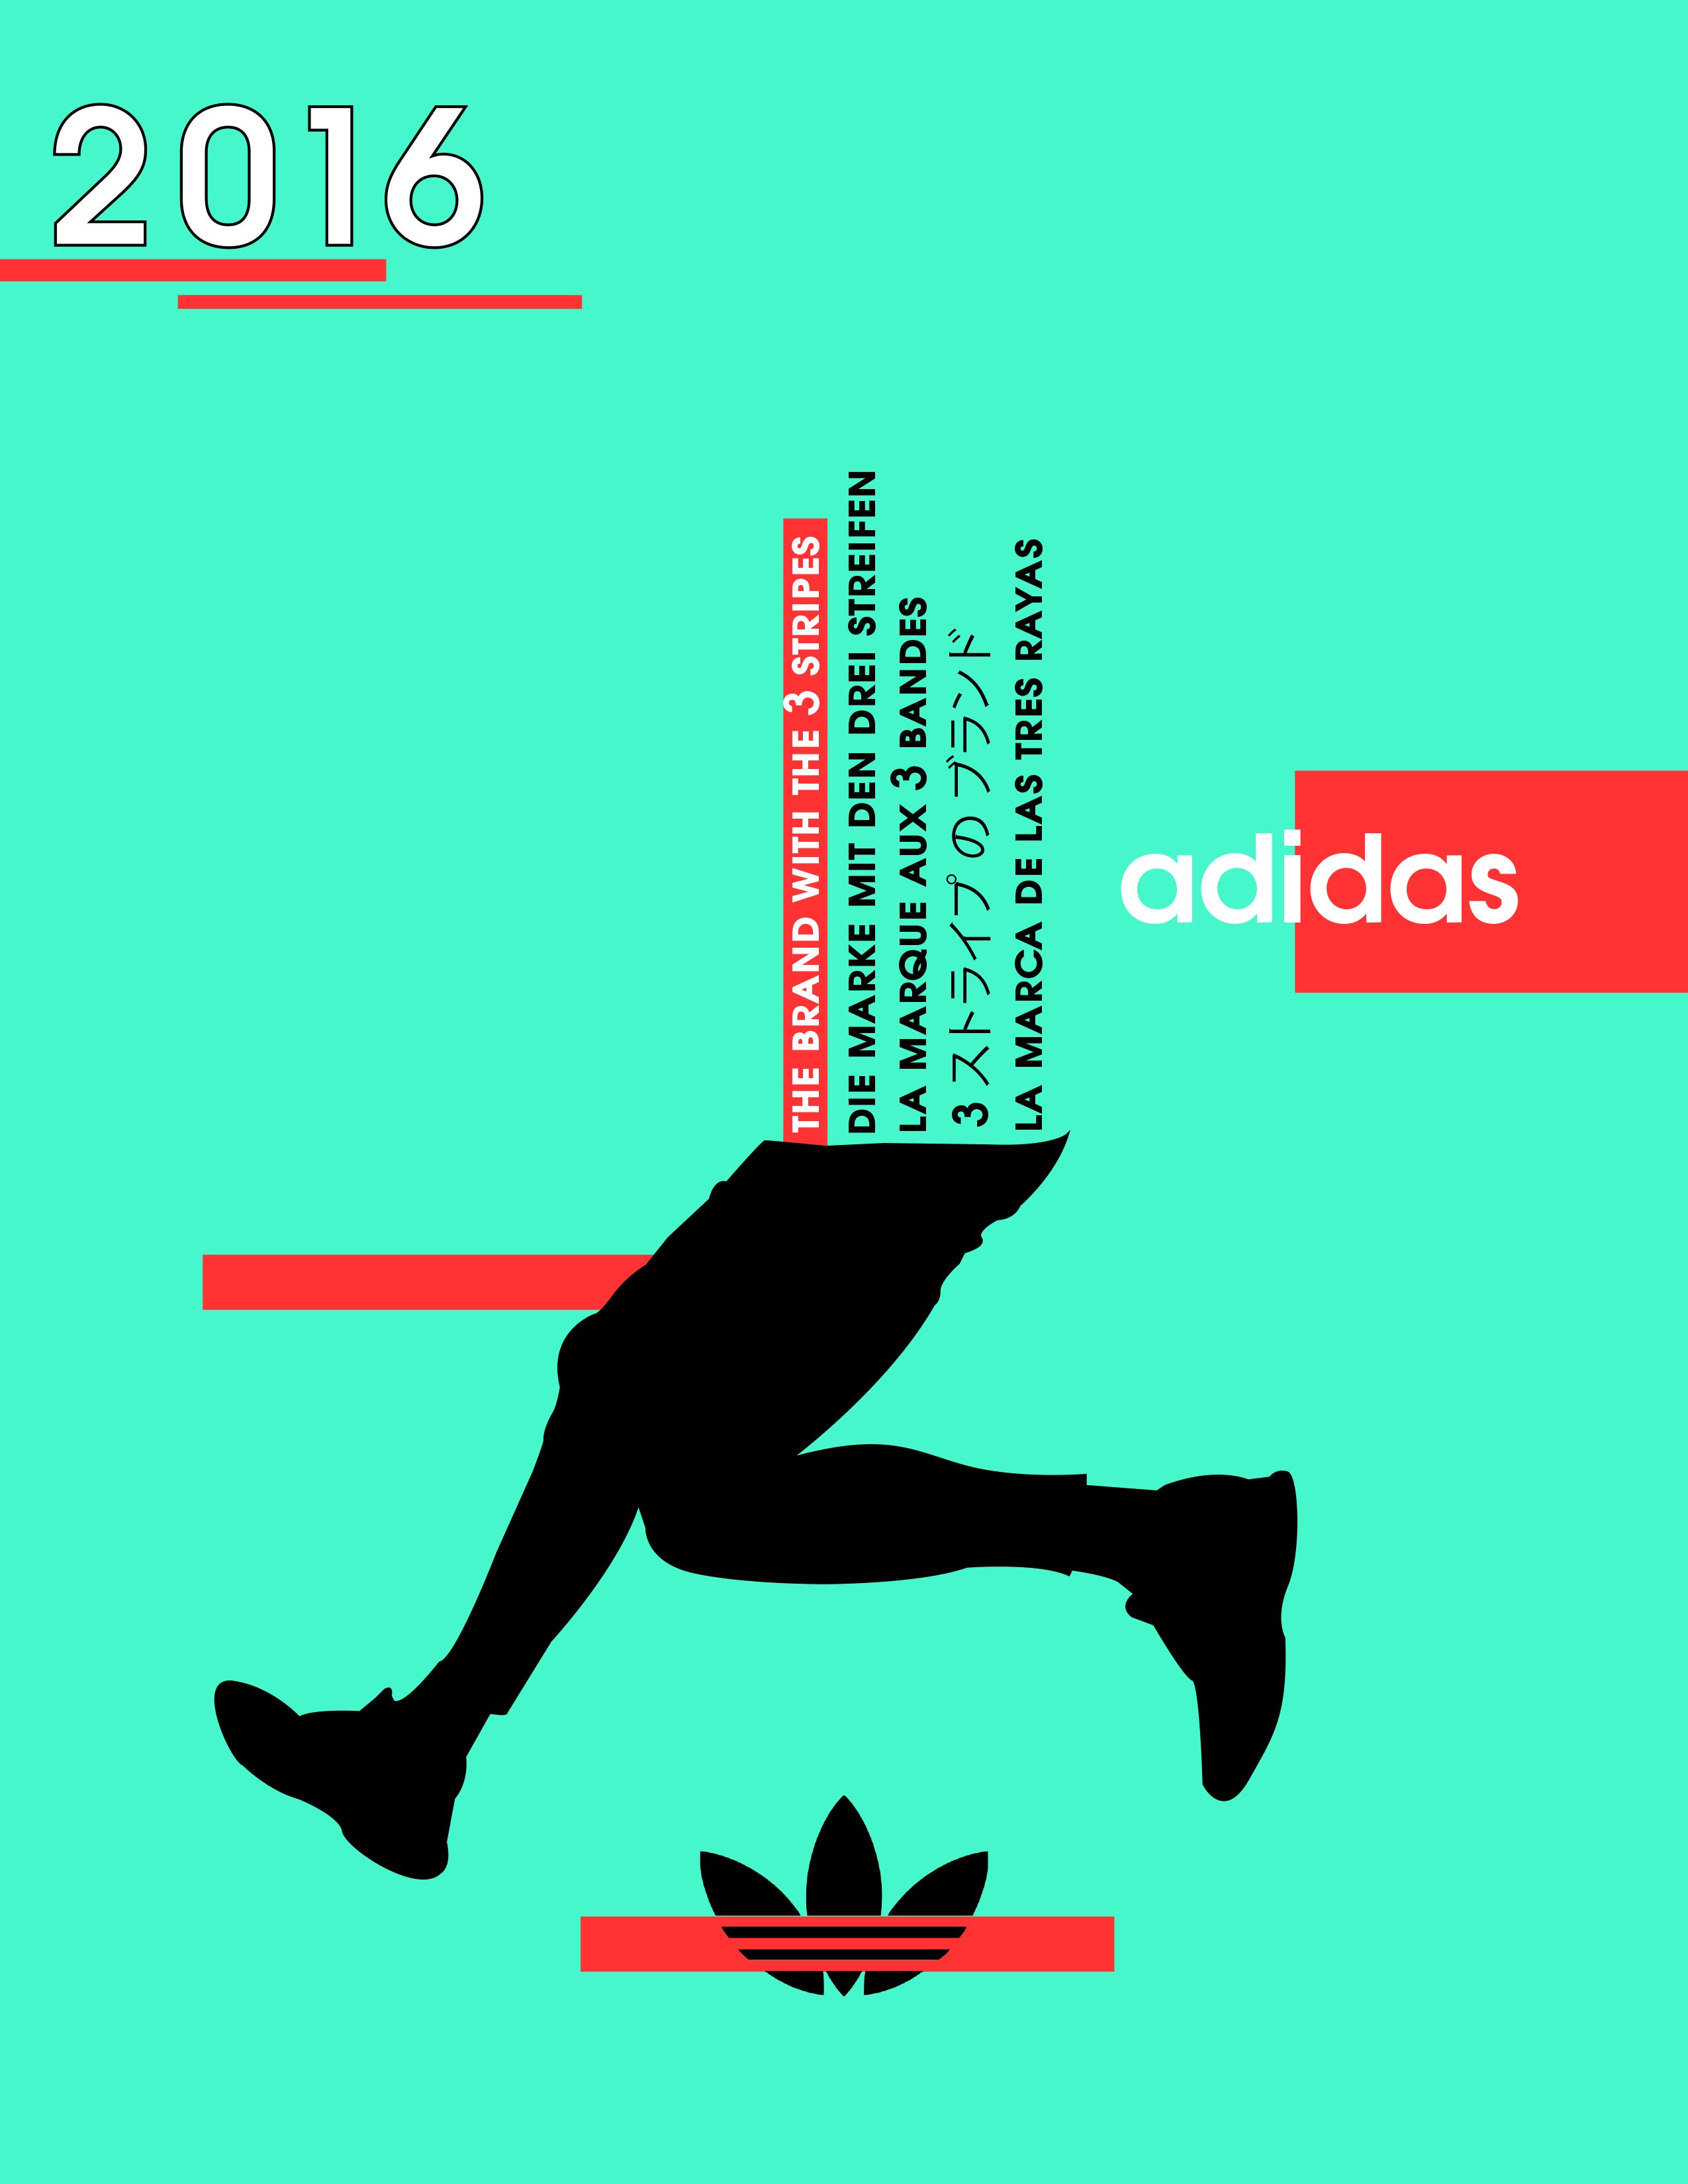 As far as people are concerned Possible God adidas 2016 annual report  details the mall Airfield